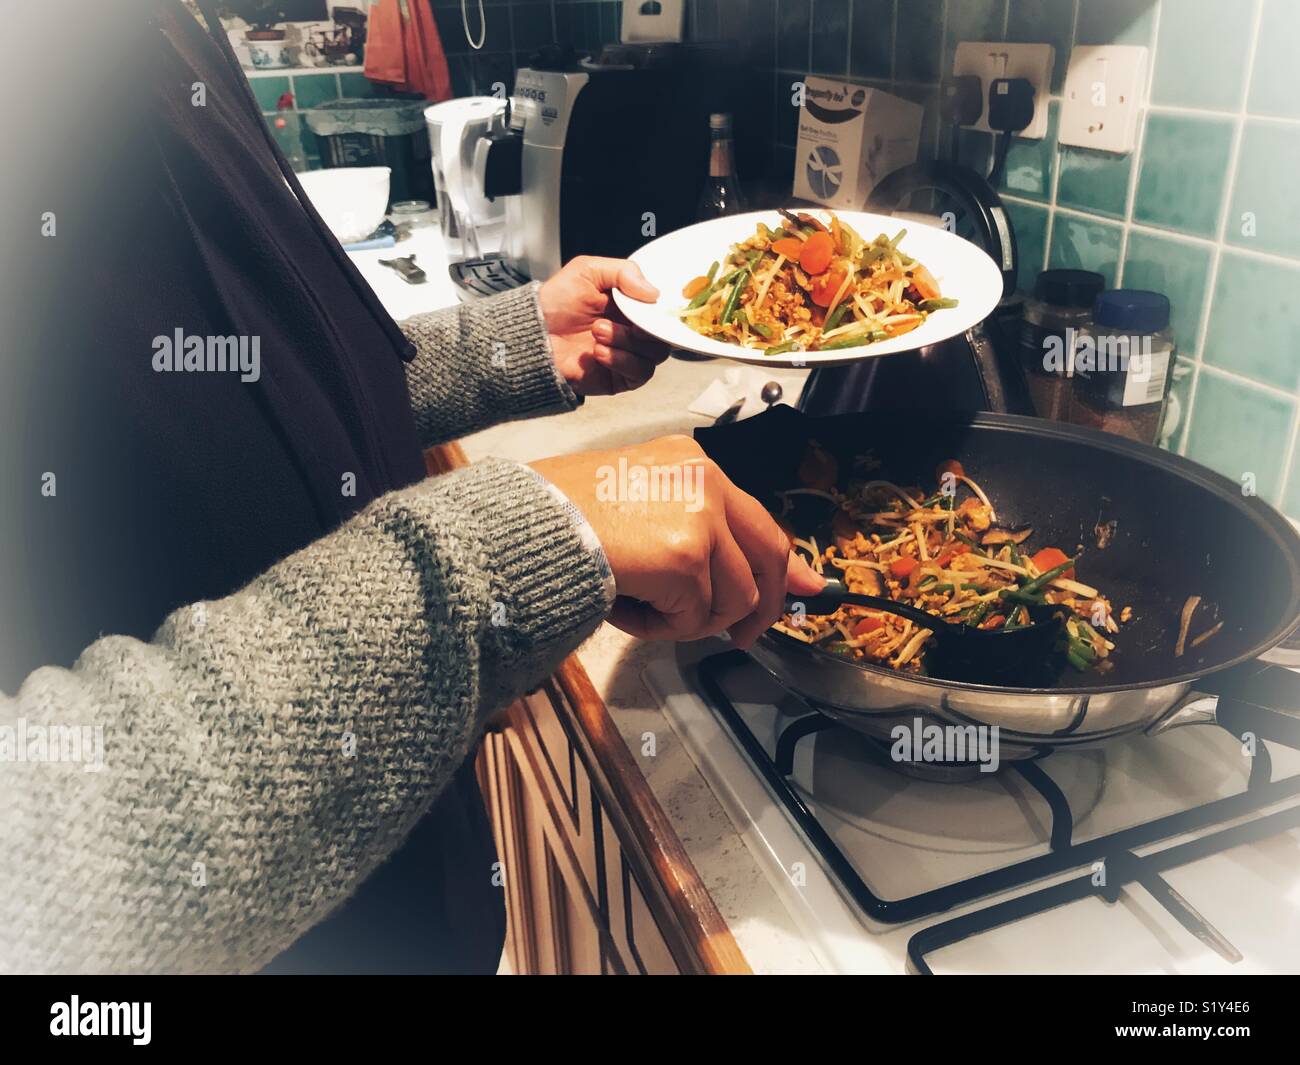 Woman in the kitchen, serving up a vegetarian stir fried supper Stock Photo